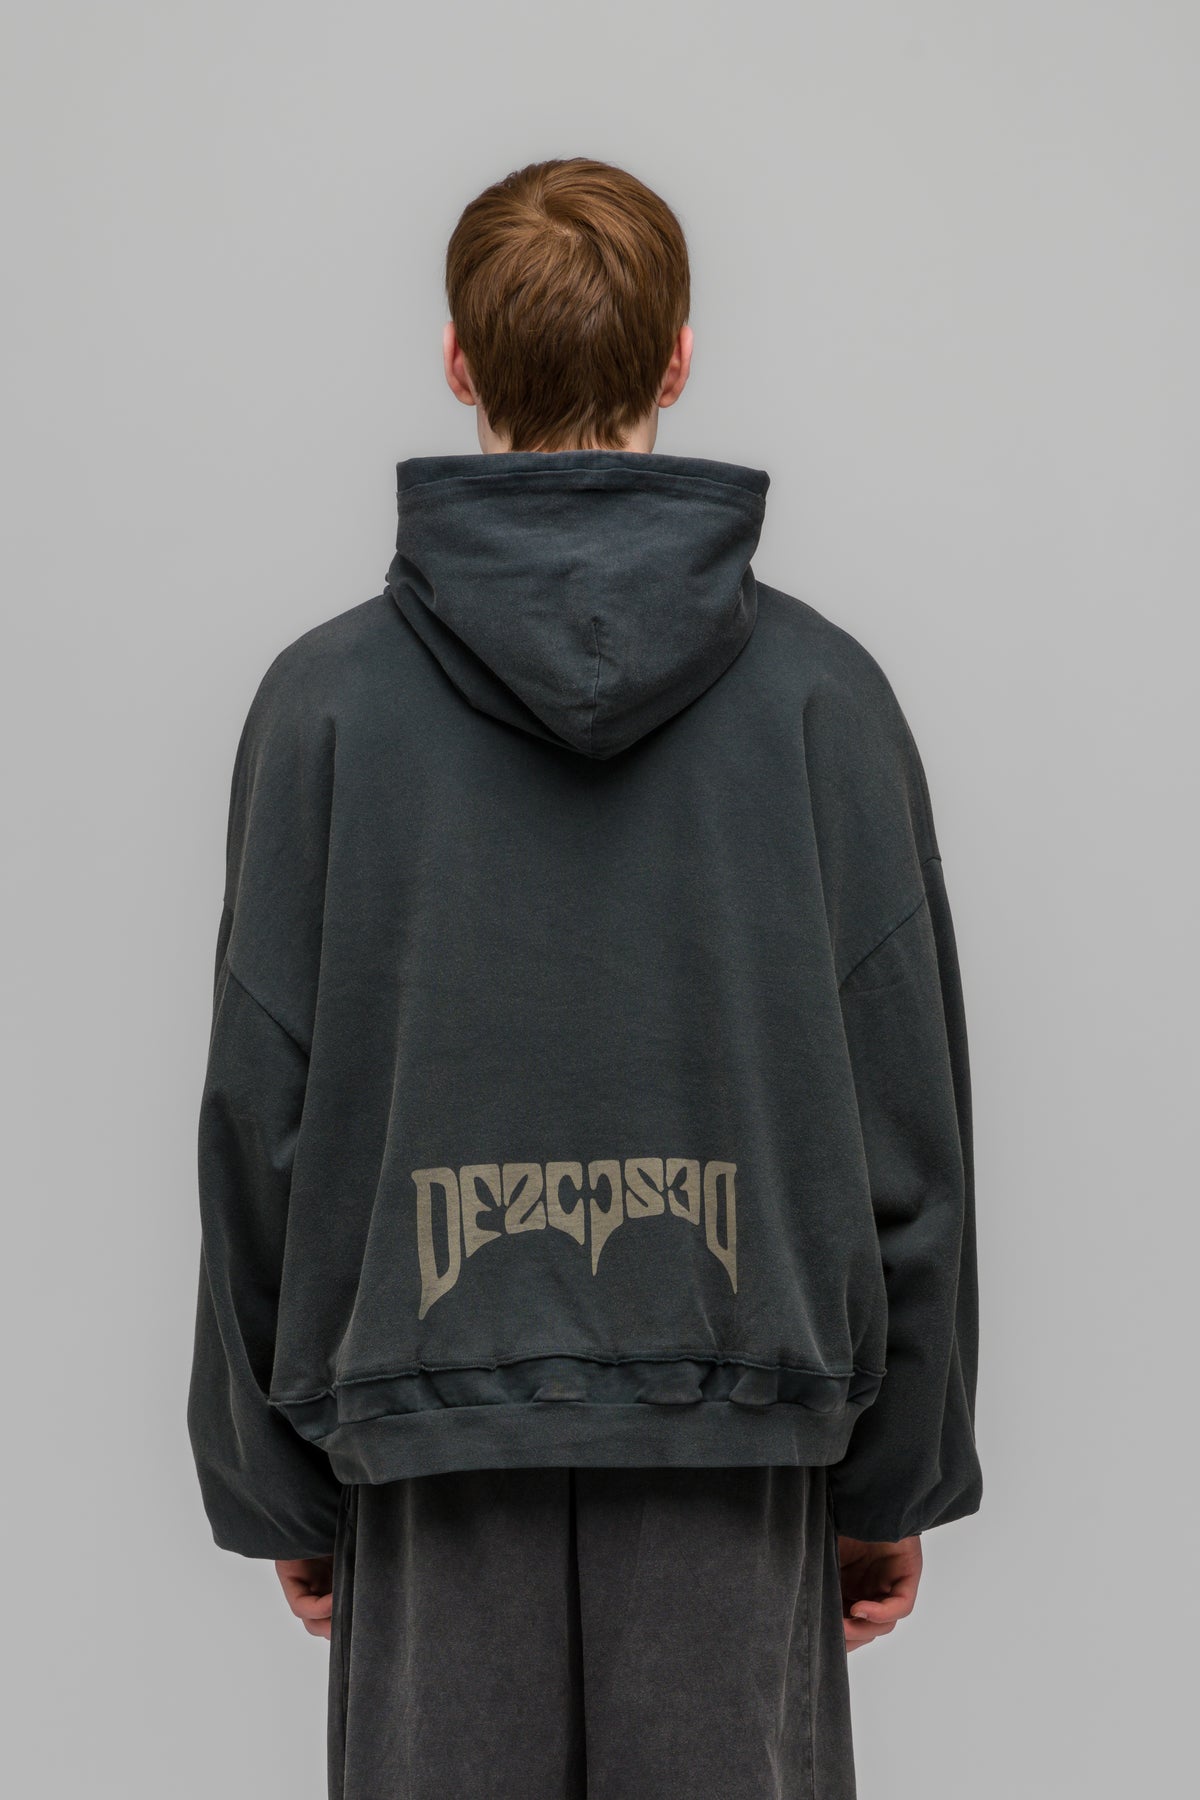 "PSYCHIC" LAYERED BUBBLE HOODIE